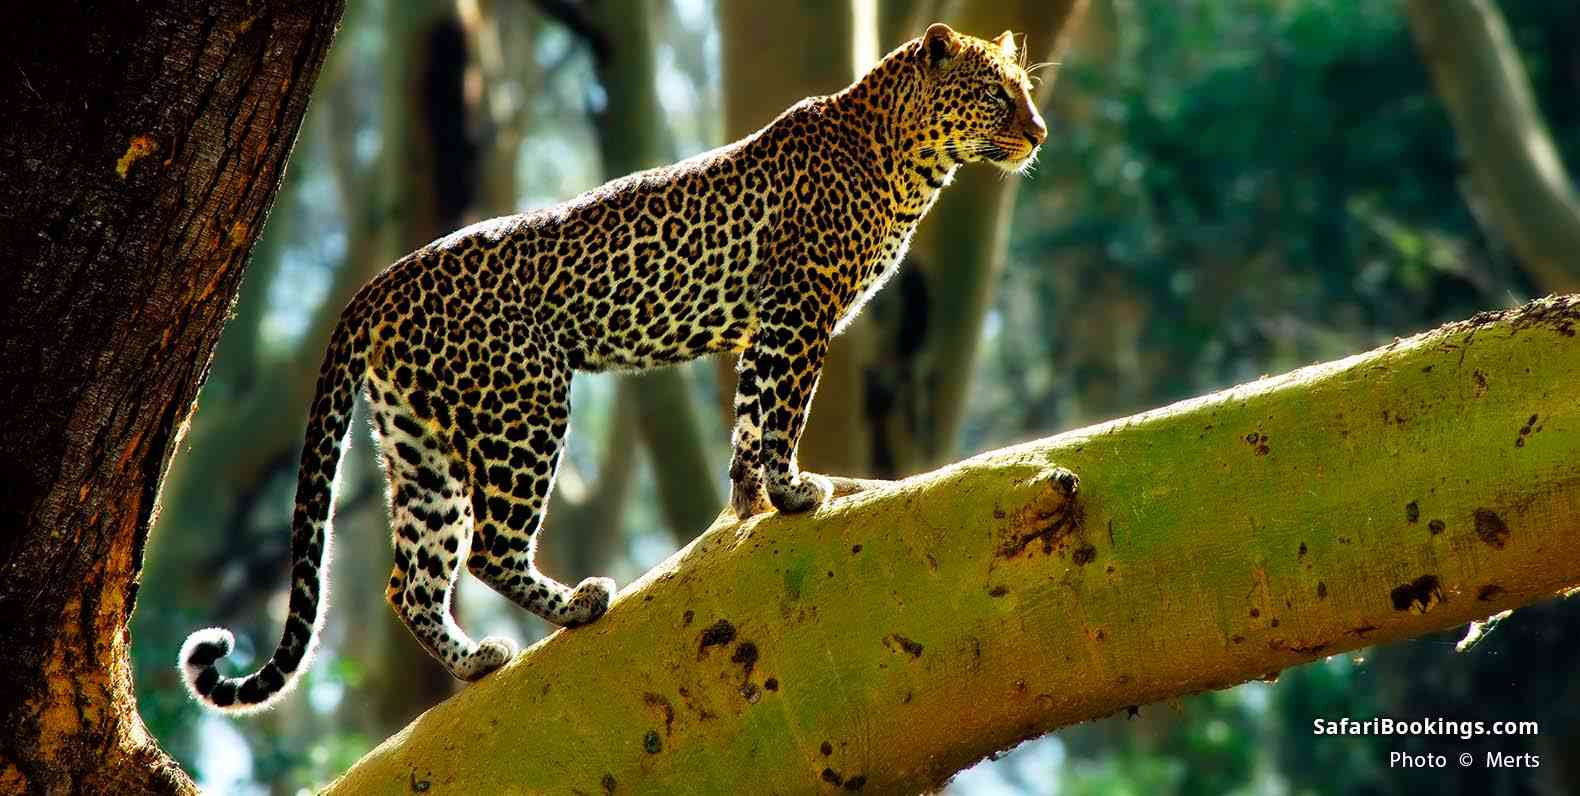 Leopard standing on a tree branch